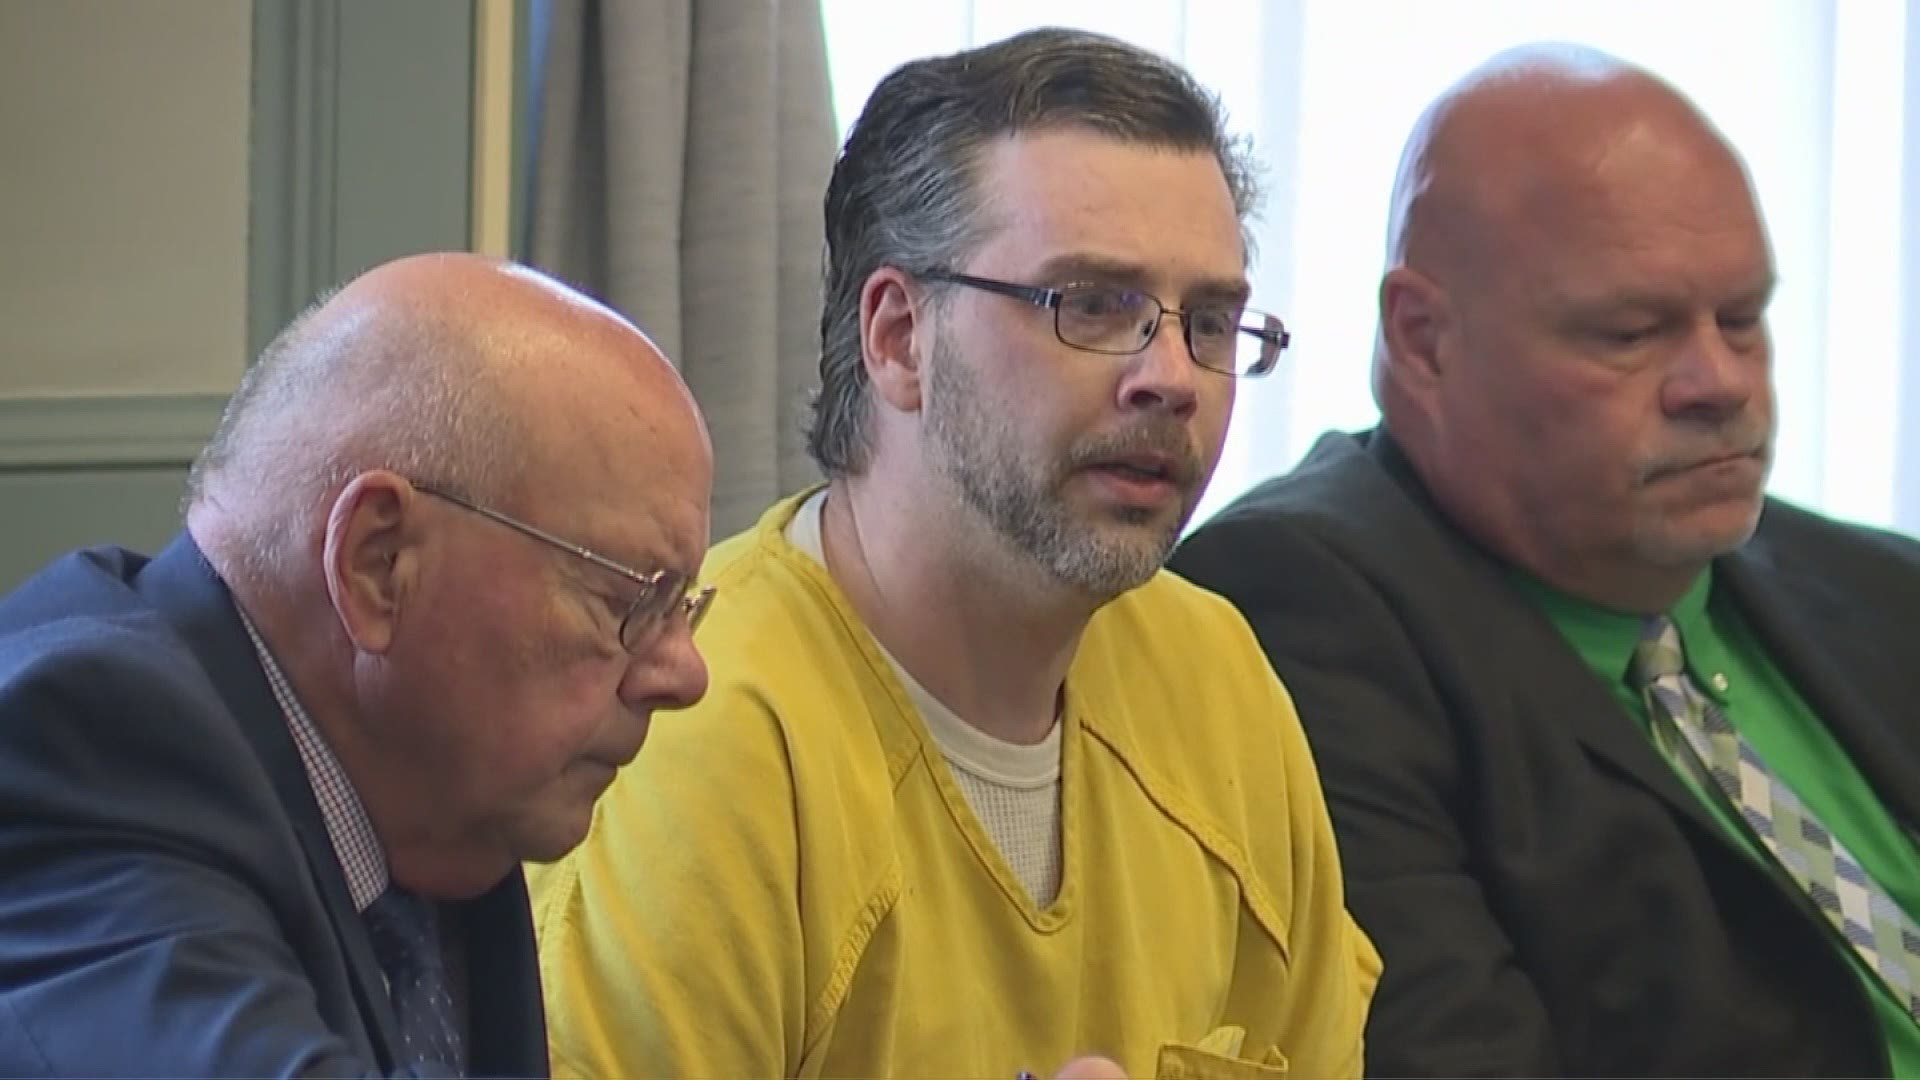 Convicted killer Shawn Grate speaks before a judge imposes the death penalty on him.